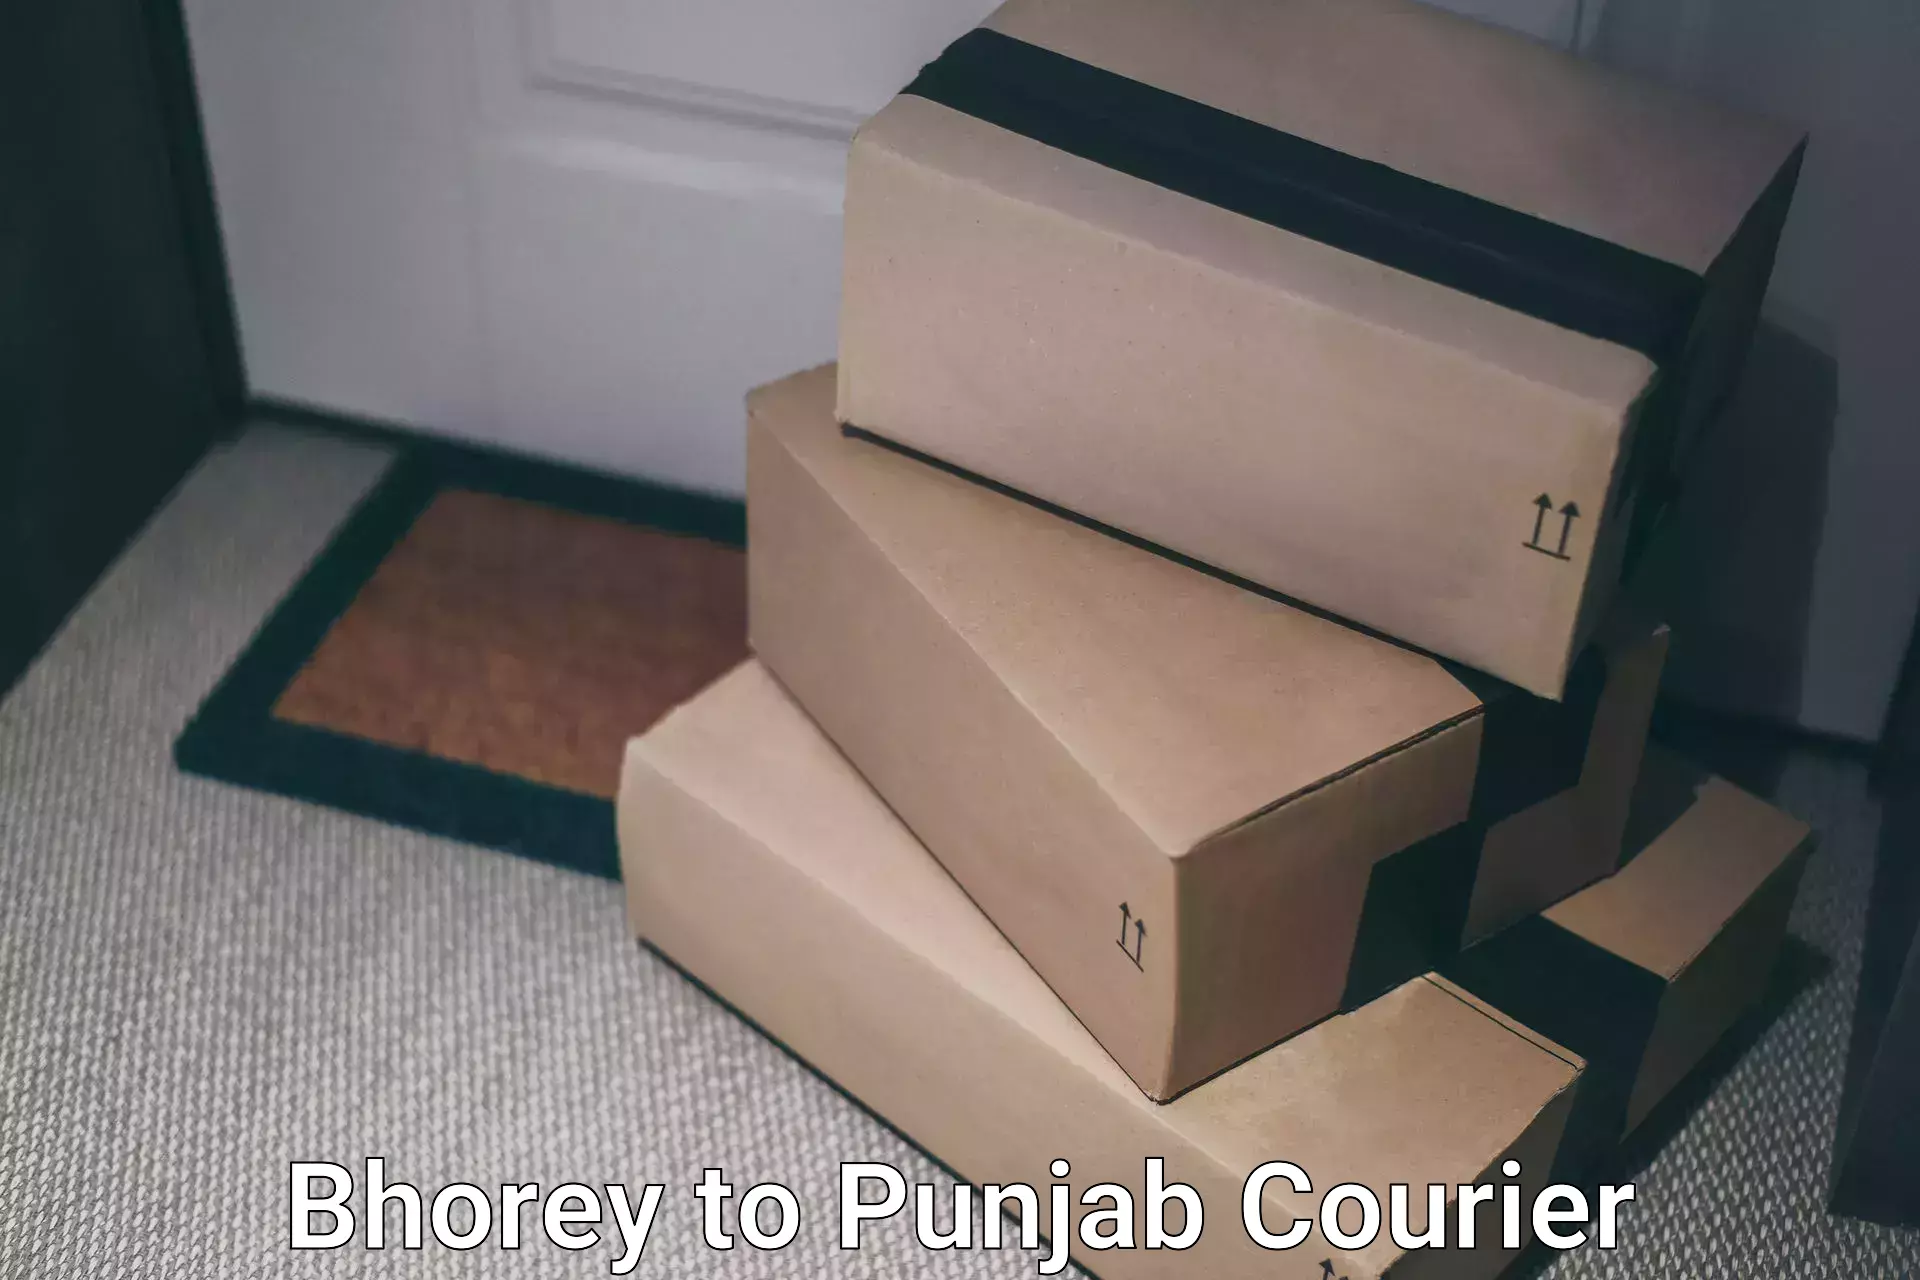 Heavy parcel delivery Bhorey to Punjab